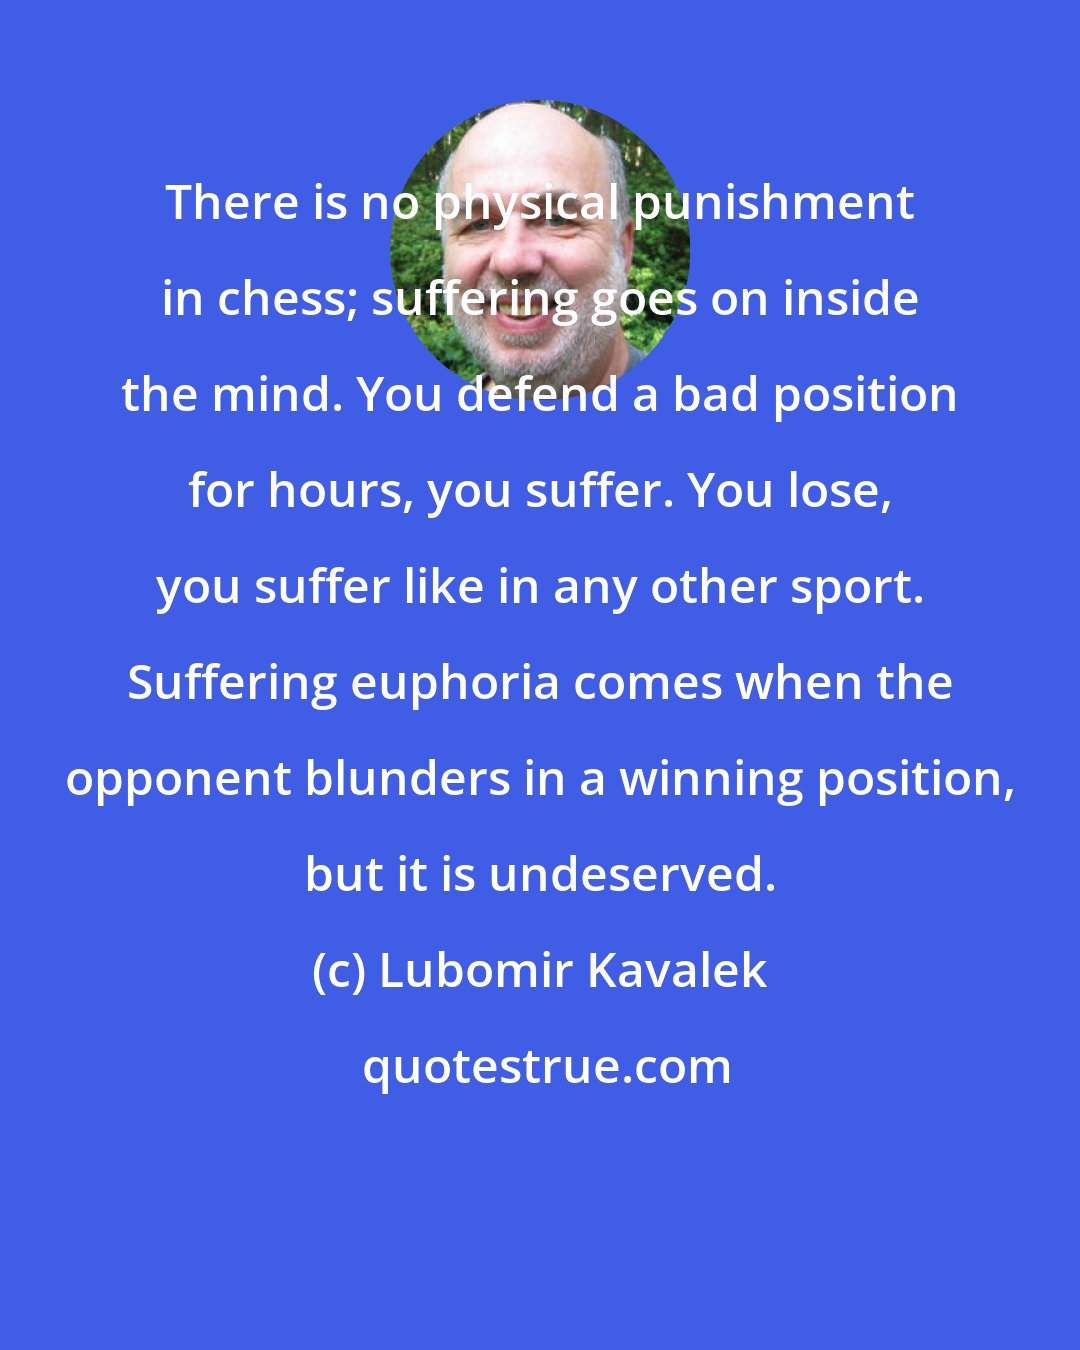 Lubomir Kavalek: There is no physical punishment in chess; suffering goes on inside the mind. You defend a bad position for hours, you suffer. You lose, you suffer like in any other sport. Suffering euphoria comes when the opponent blunders in a winning position, but it is undeserved.